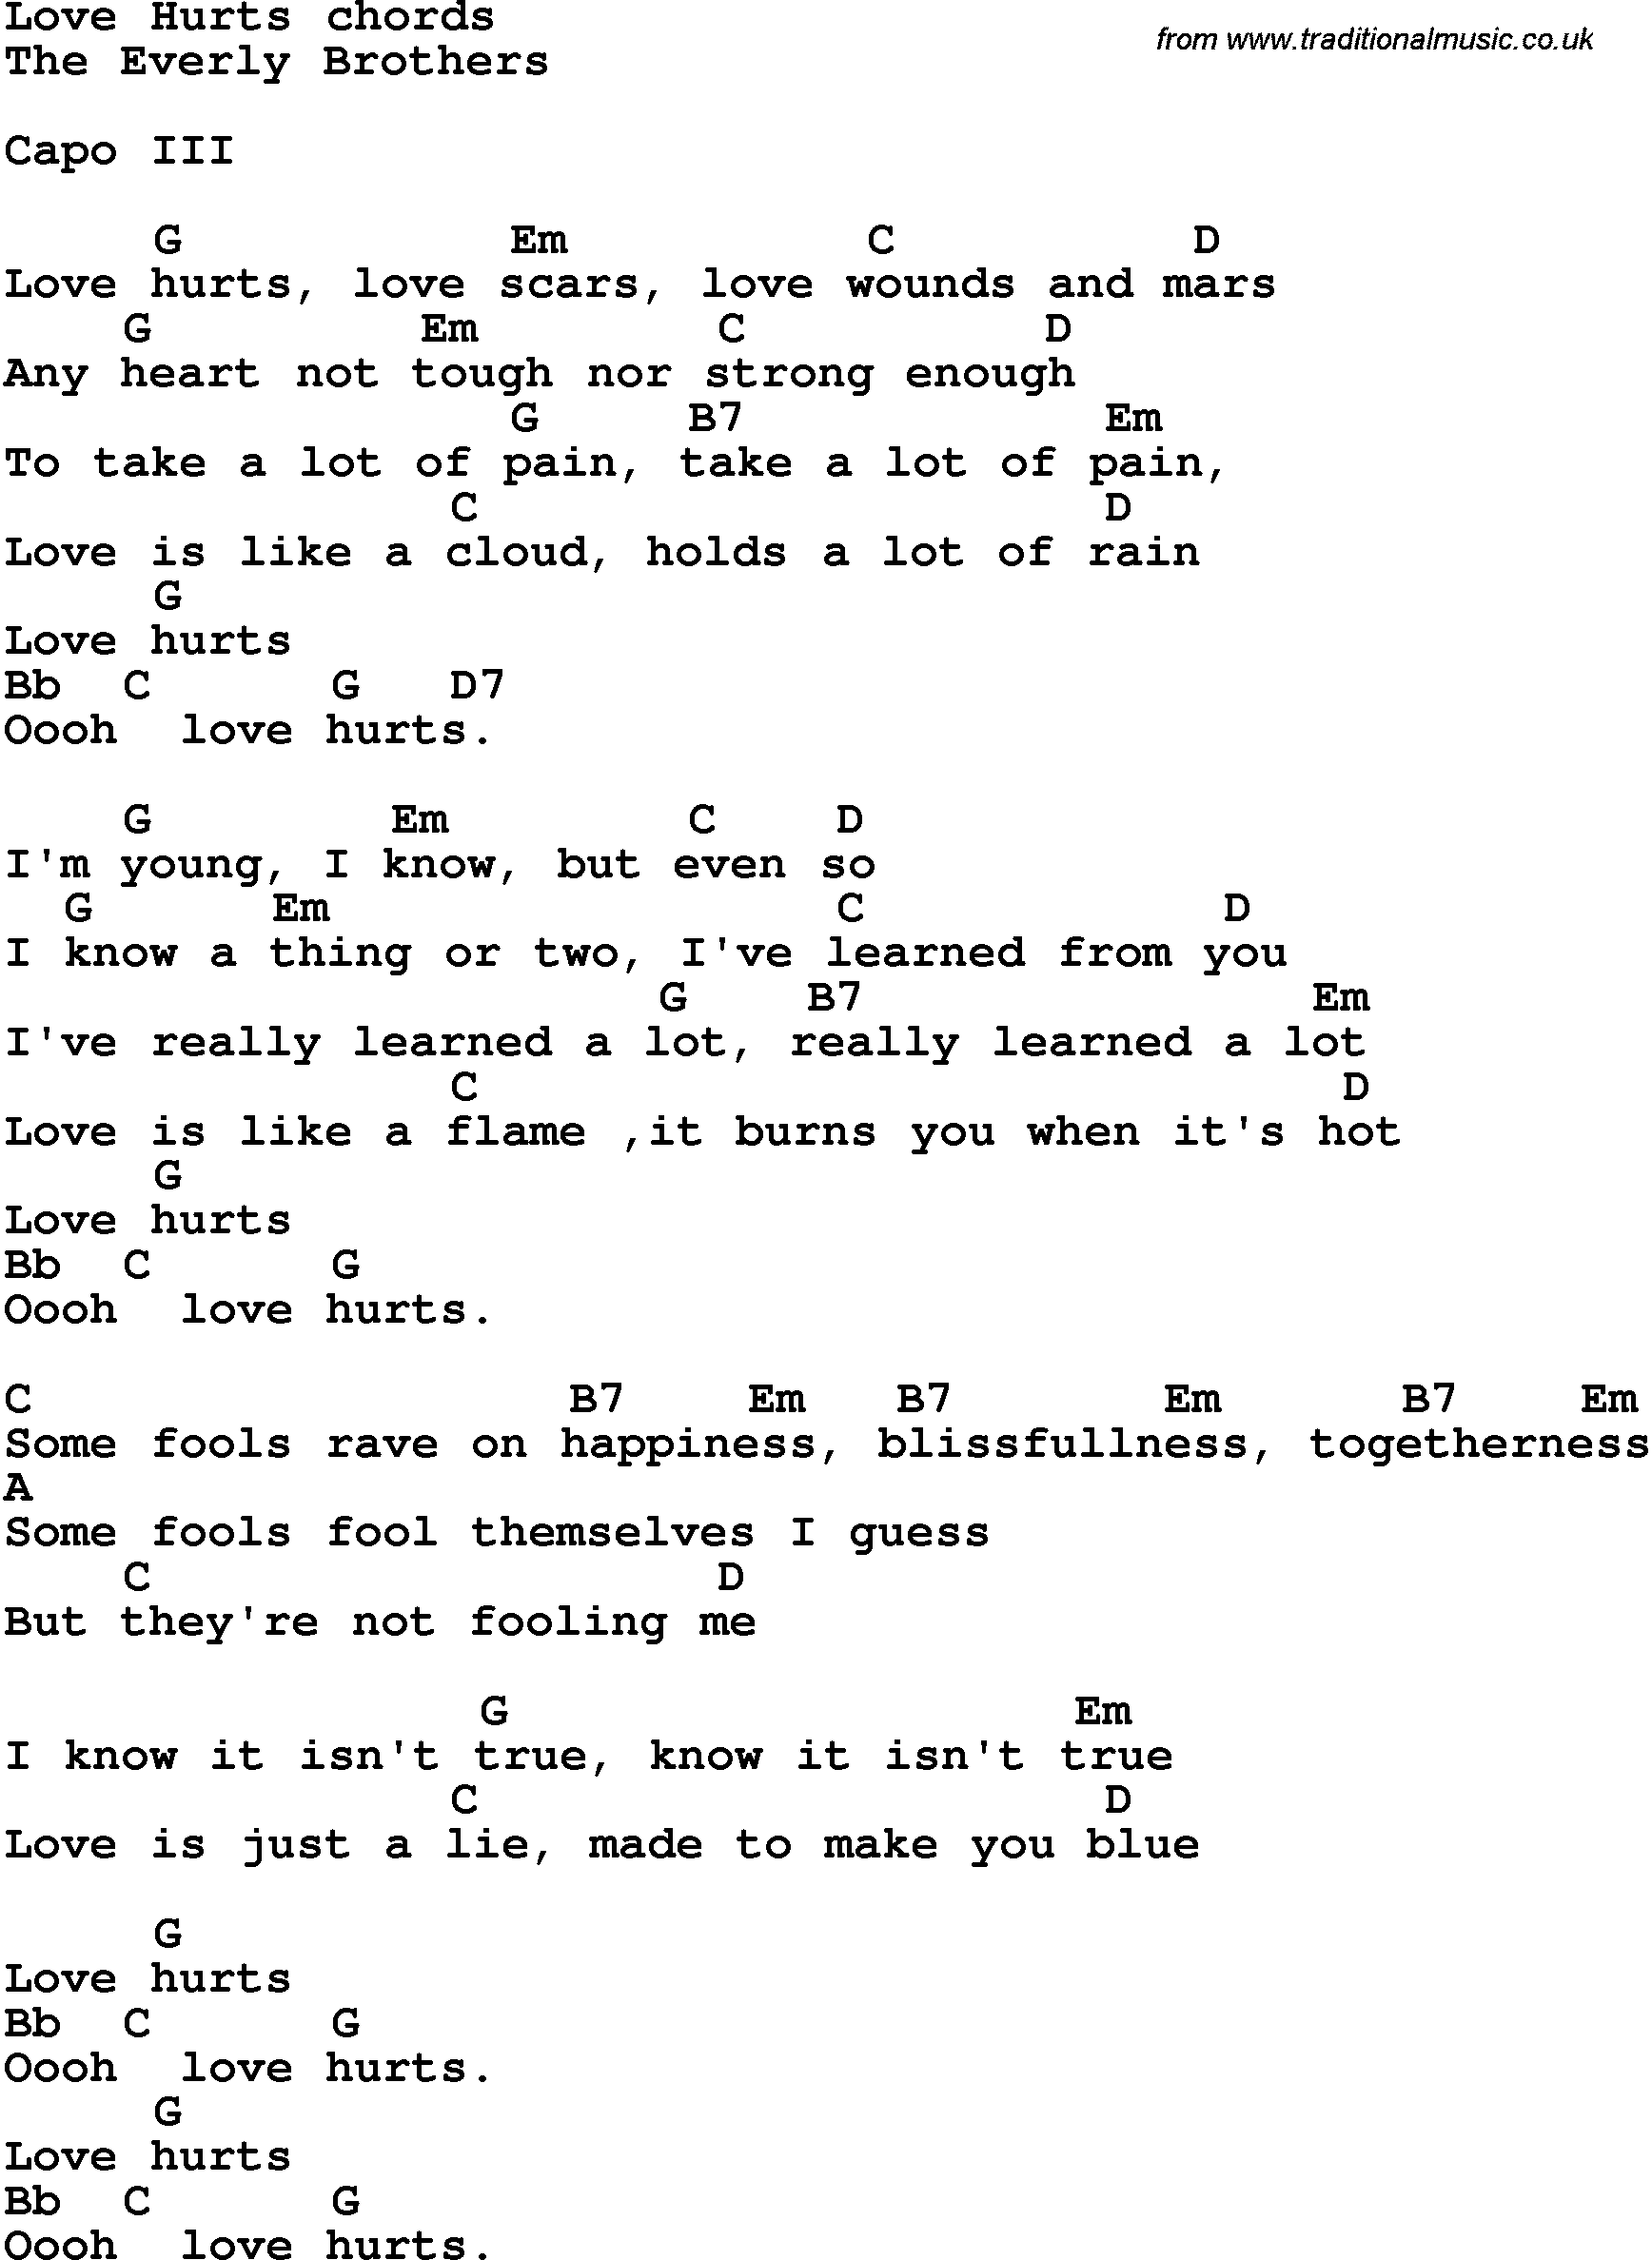 Song Lyrics with guitar chords for Love Hurts - The Everly Brothers